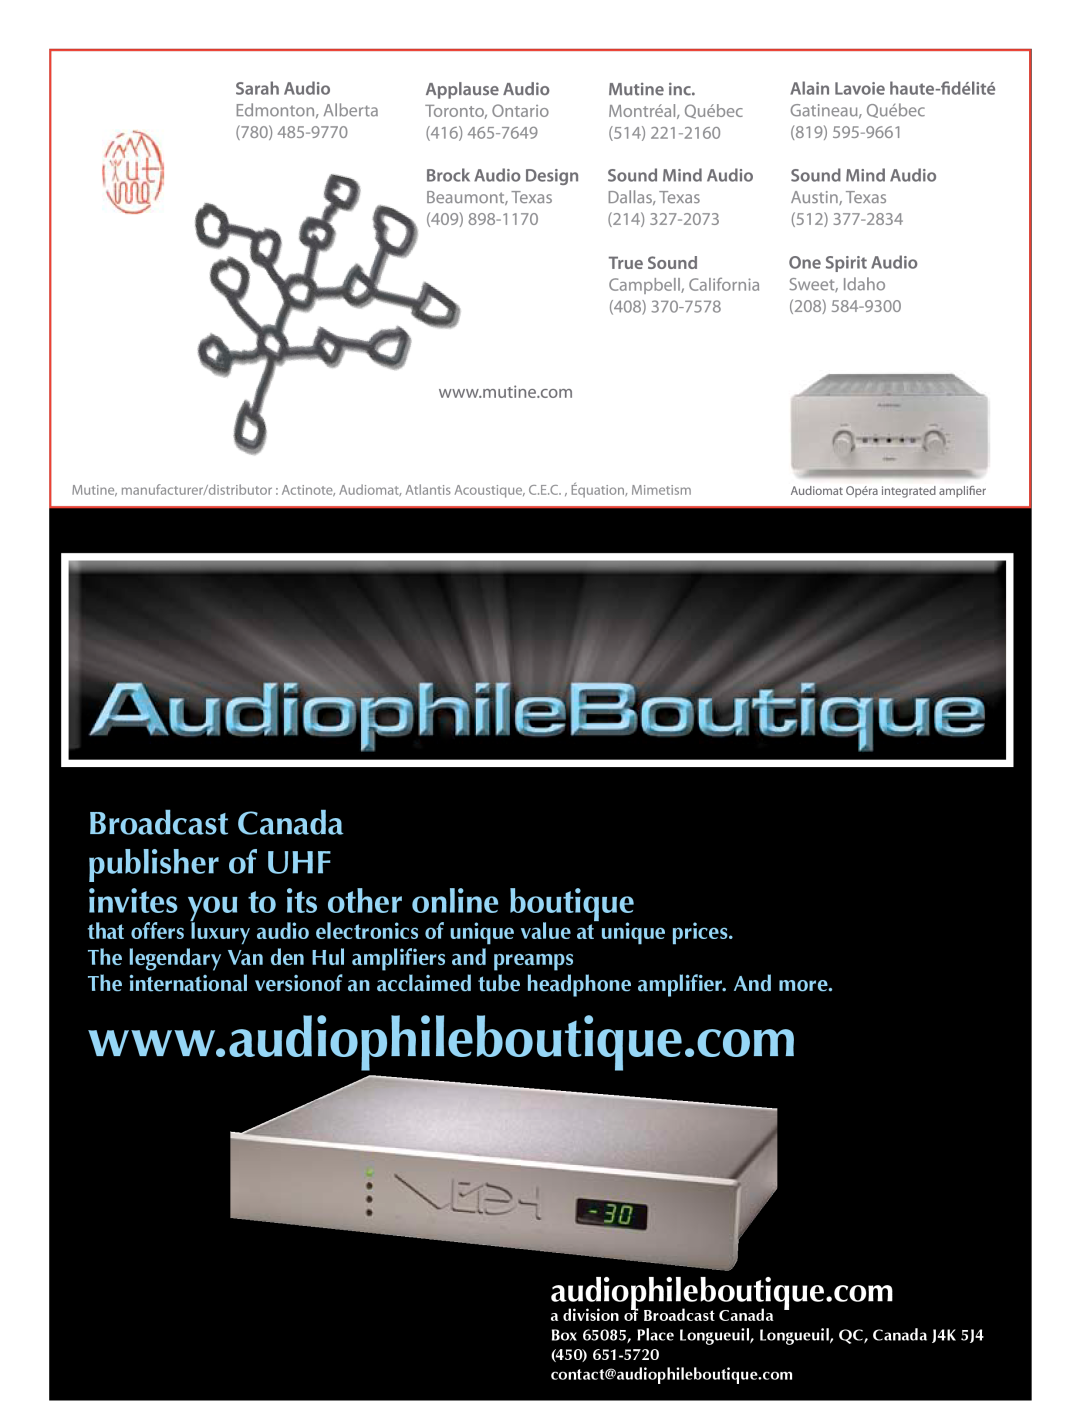 Koss 76 manual audiophileboutique.com, invites you to its other online boutique, Broadcast Canada publisher of UHF 